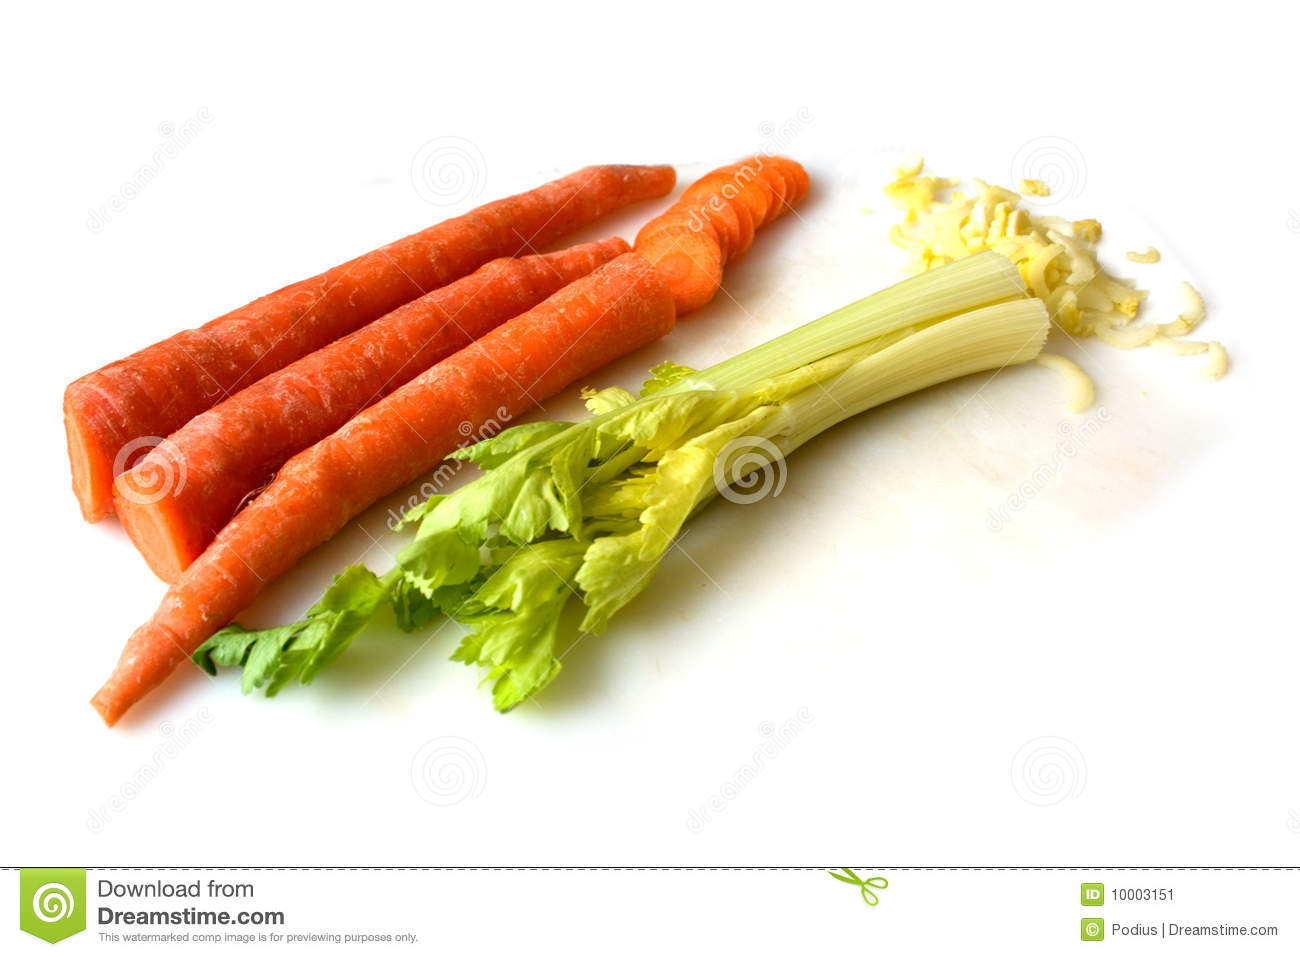 Celery And Carrots Stock Image   Image  10003151